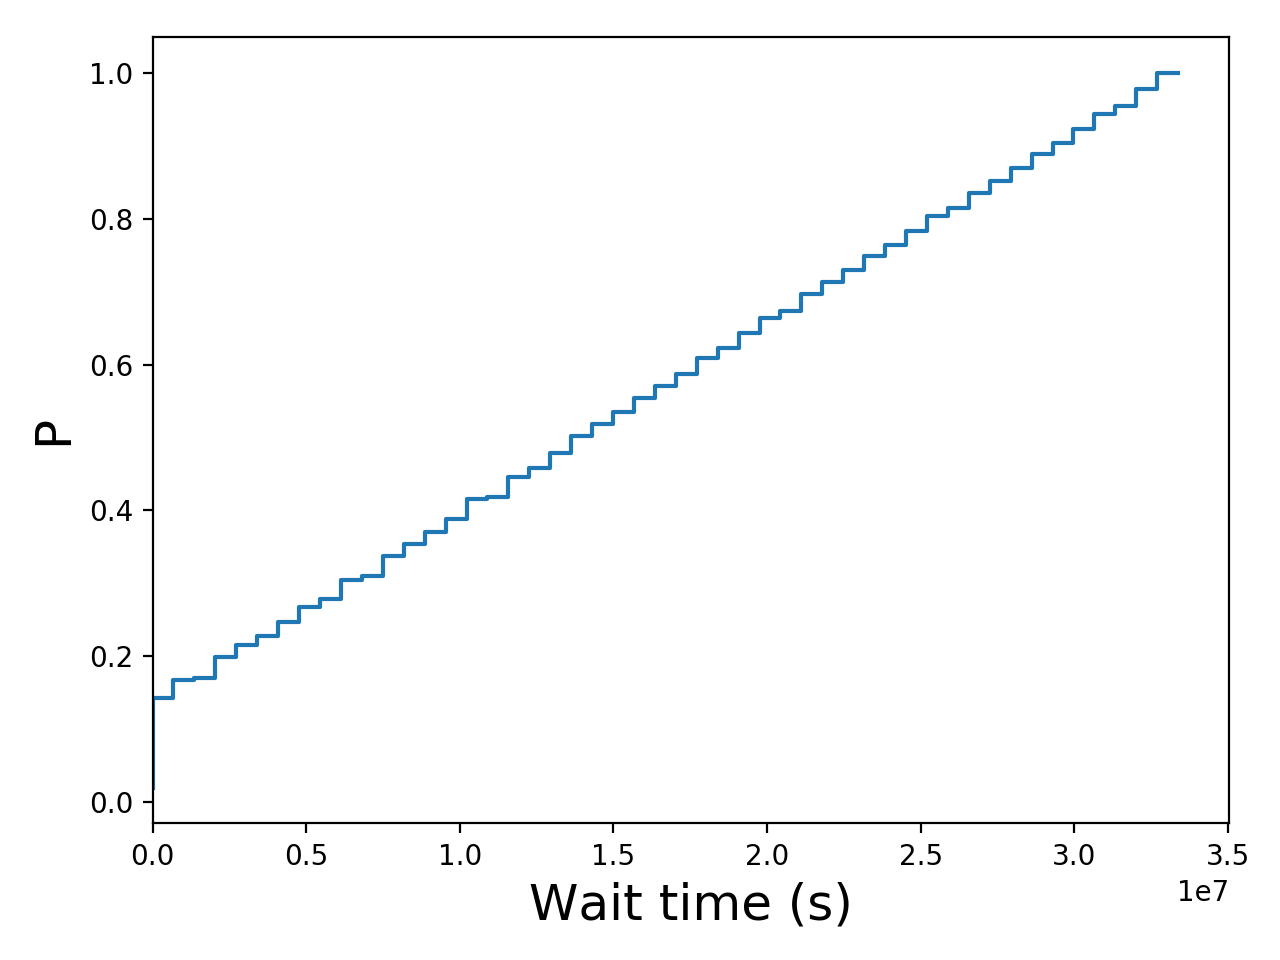 Task wait time CDF graph for the Pegasus_P3 trace.